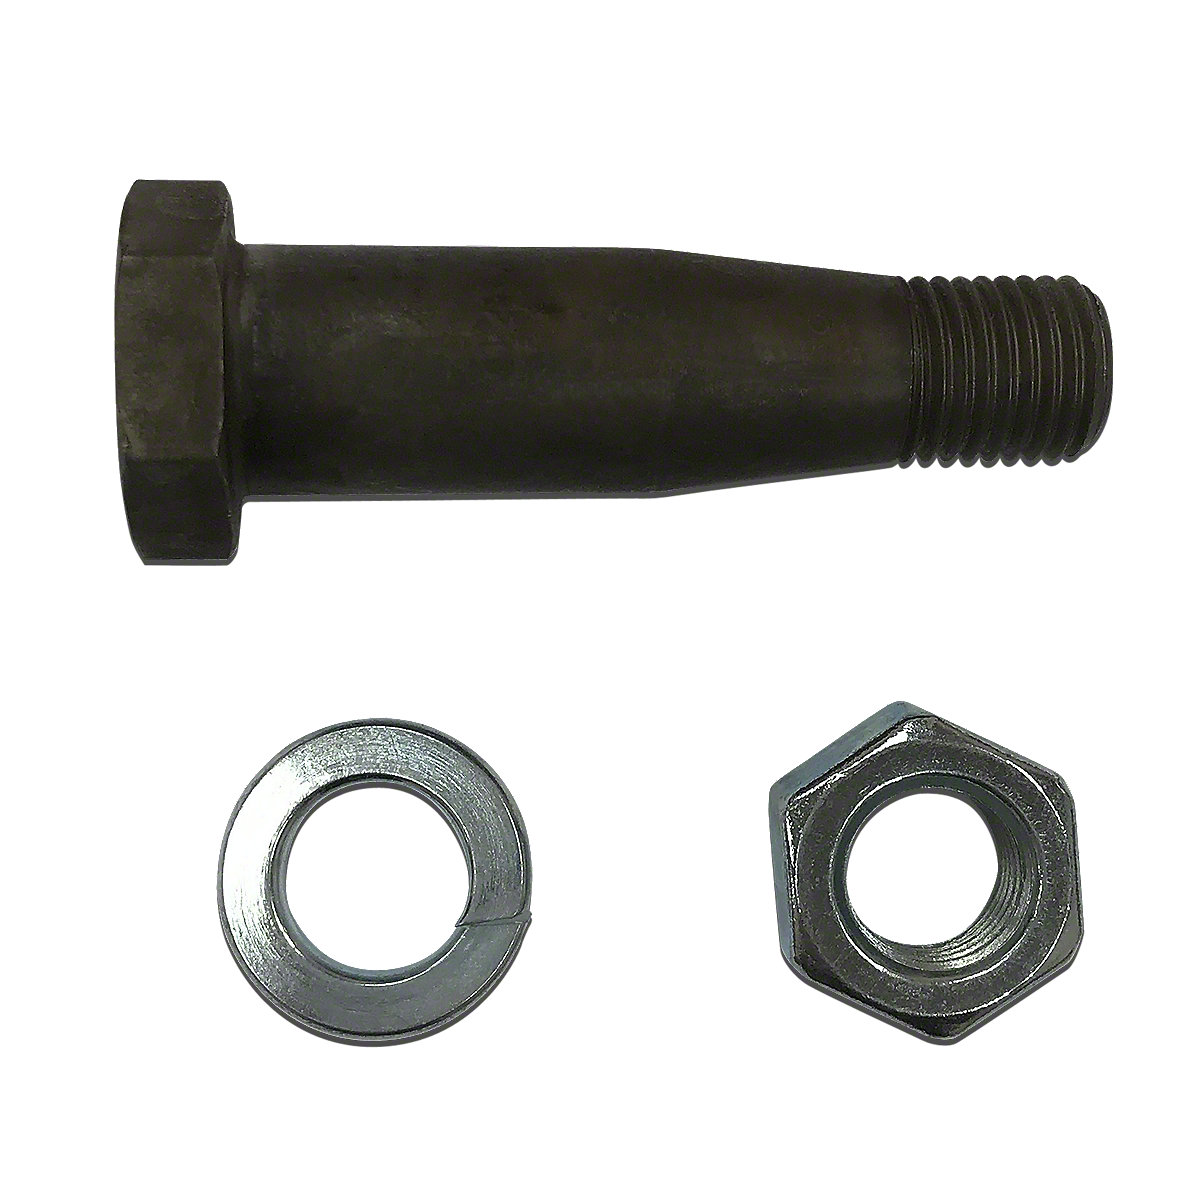 Clutch Joint Bolt with lock washer and nut - M		 MD		 Super M		 Super MD		 Super MTA		 O6		 ODS6		 OS6		 W6